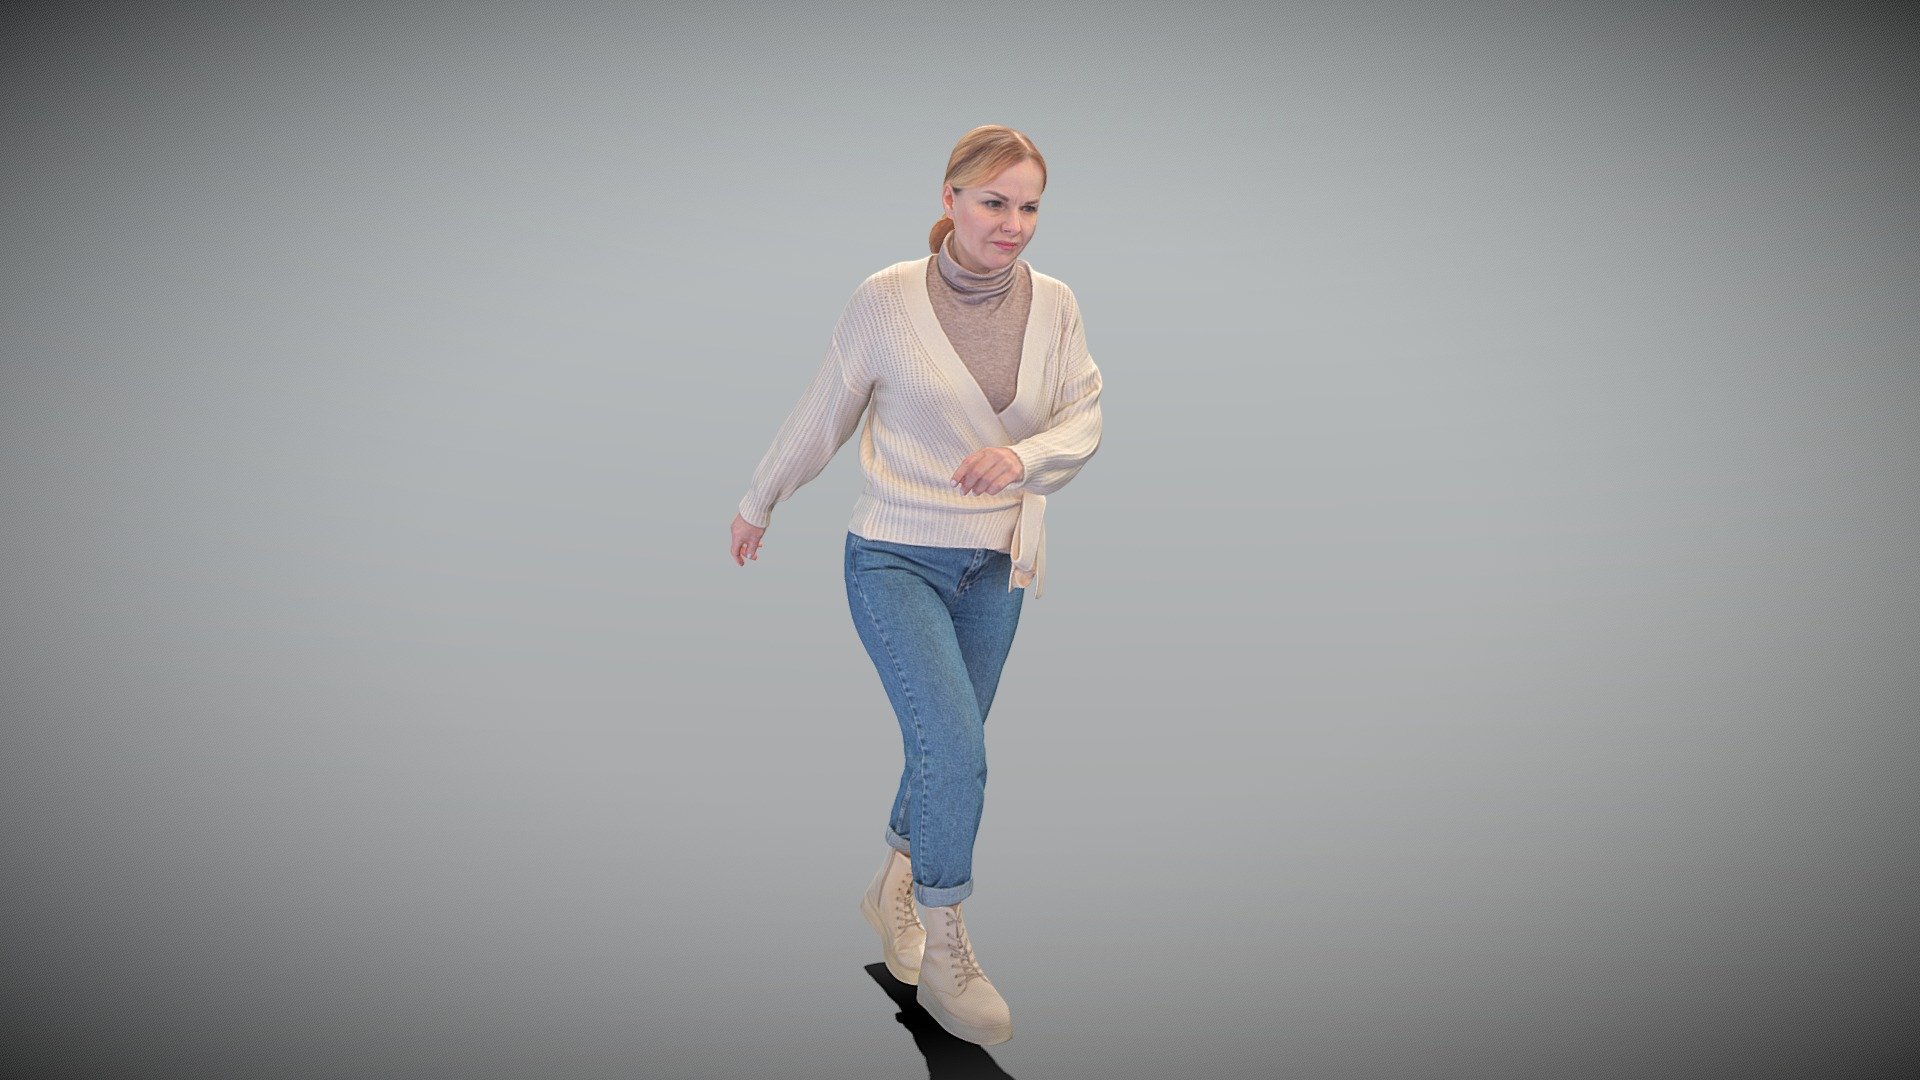 This is a true human size and detailed model of a beautiful young woman of Caucasian appearance dressed in casual style. The model is captured in casual pose to be perfectly matching for various architectural, product visualization as a background character within urban installations, city designs, outdoor design presentations, VR/AR content, etc.

Technical specifications:




digital double 3d scan model

150k &amp; 30k triangles | double triangulated

high-poly model (.ztl tool with 4-5 subdivisions) clean and retopologized automatically via ZRemesher

sufficiently clean

PBR textures 8K resolution: Diffuse, Normal, Specular maps

non-overlapping UV map

no extra plugins are required for this model

Download package includes a Cinema 4D project file with Redshift shader, OBJ, FBX, STL files, which are applicable for 3ds Max, Maya, Unreal Engine, Unity, Blender, etc. All the textures you will find in the “Tex” folder, included into the main archive.

3D EVERYTHING

Stand with Ukraine! - Beautiful woman walking 337 - Buy Royalty Free 3D model by deep3dstudio 3d model